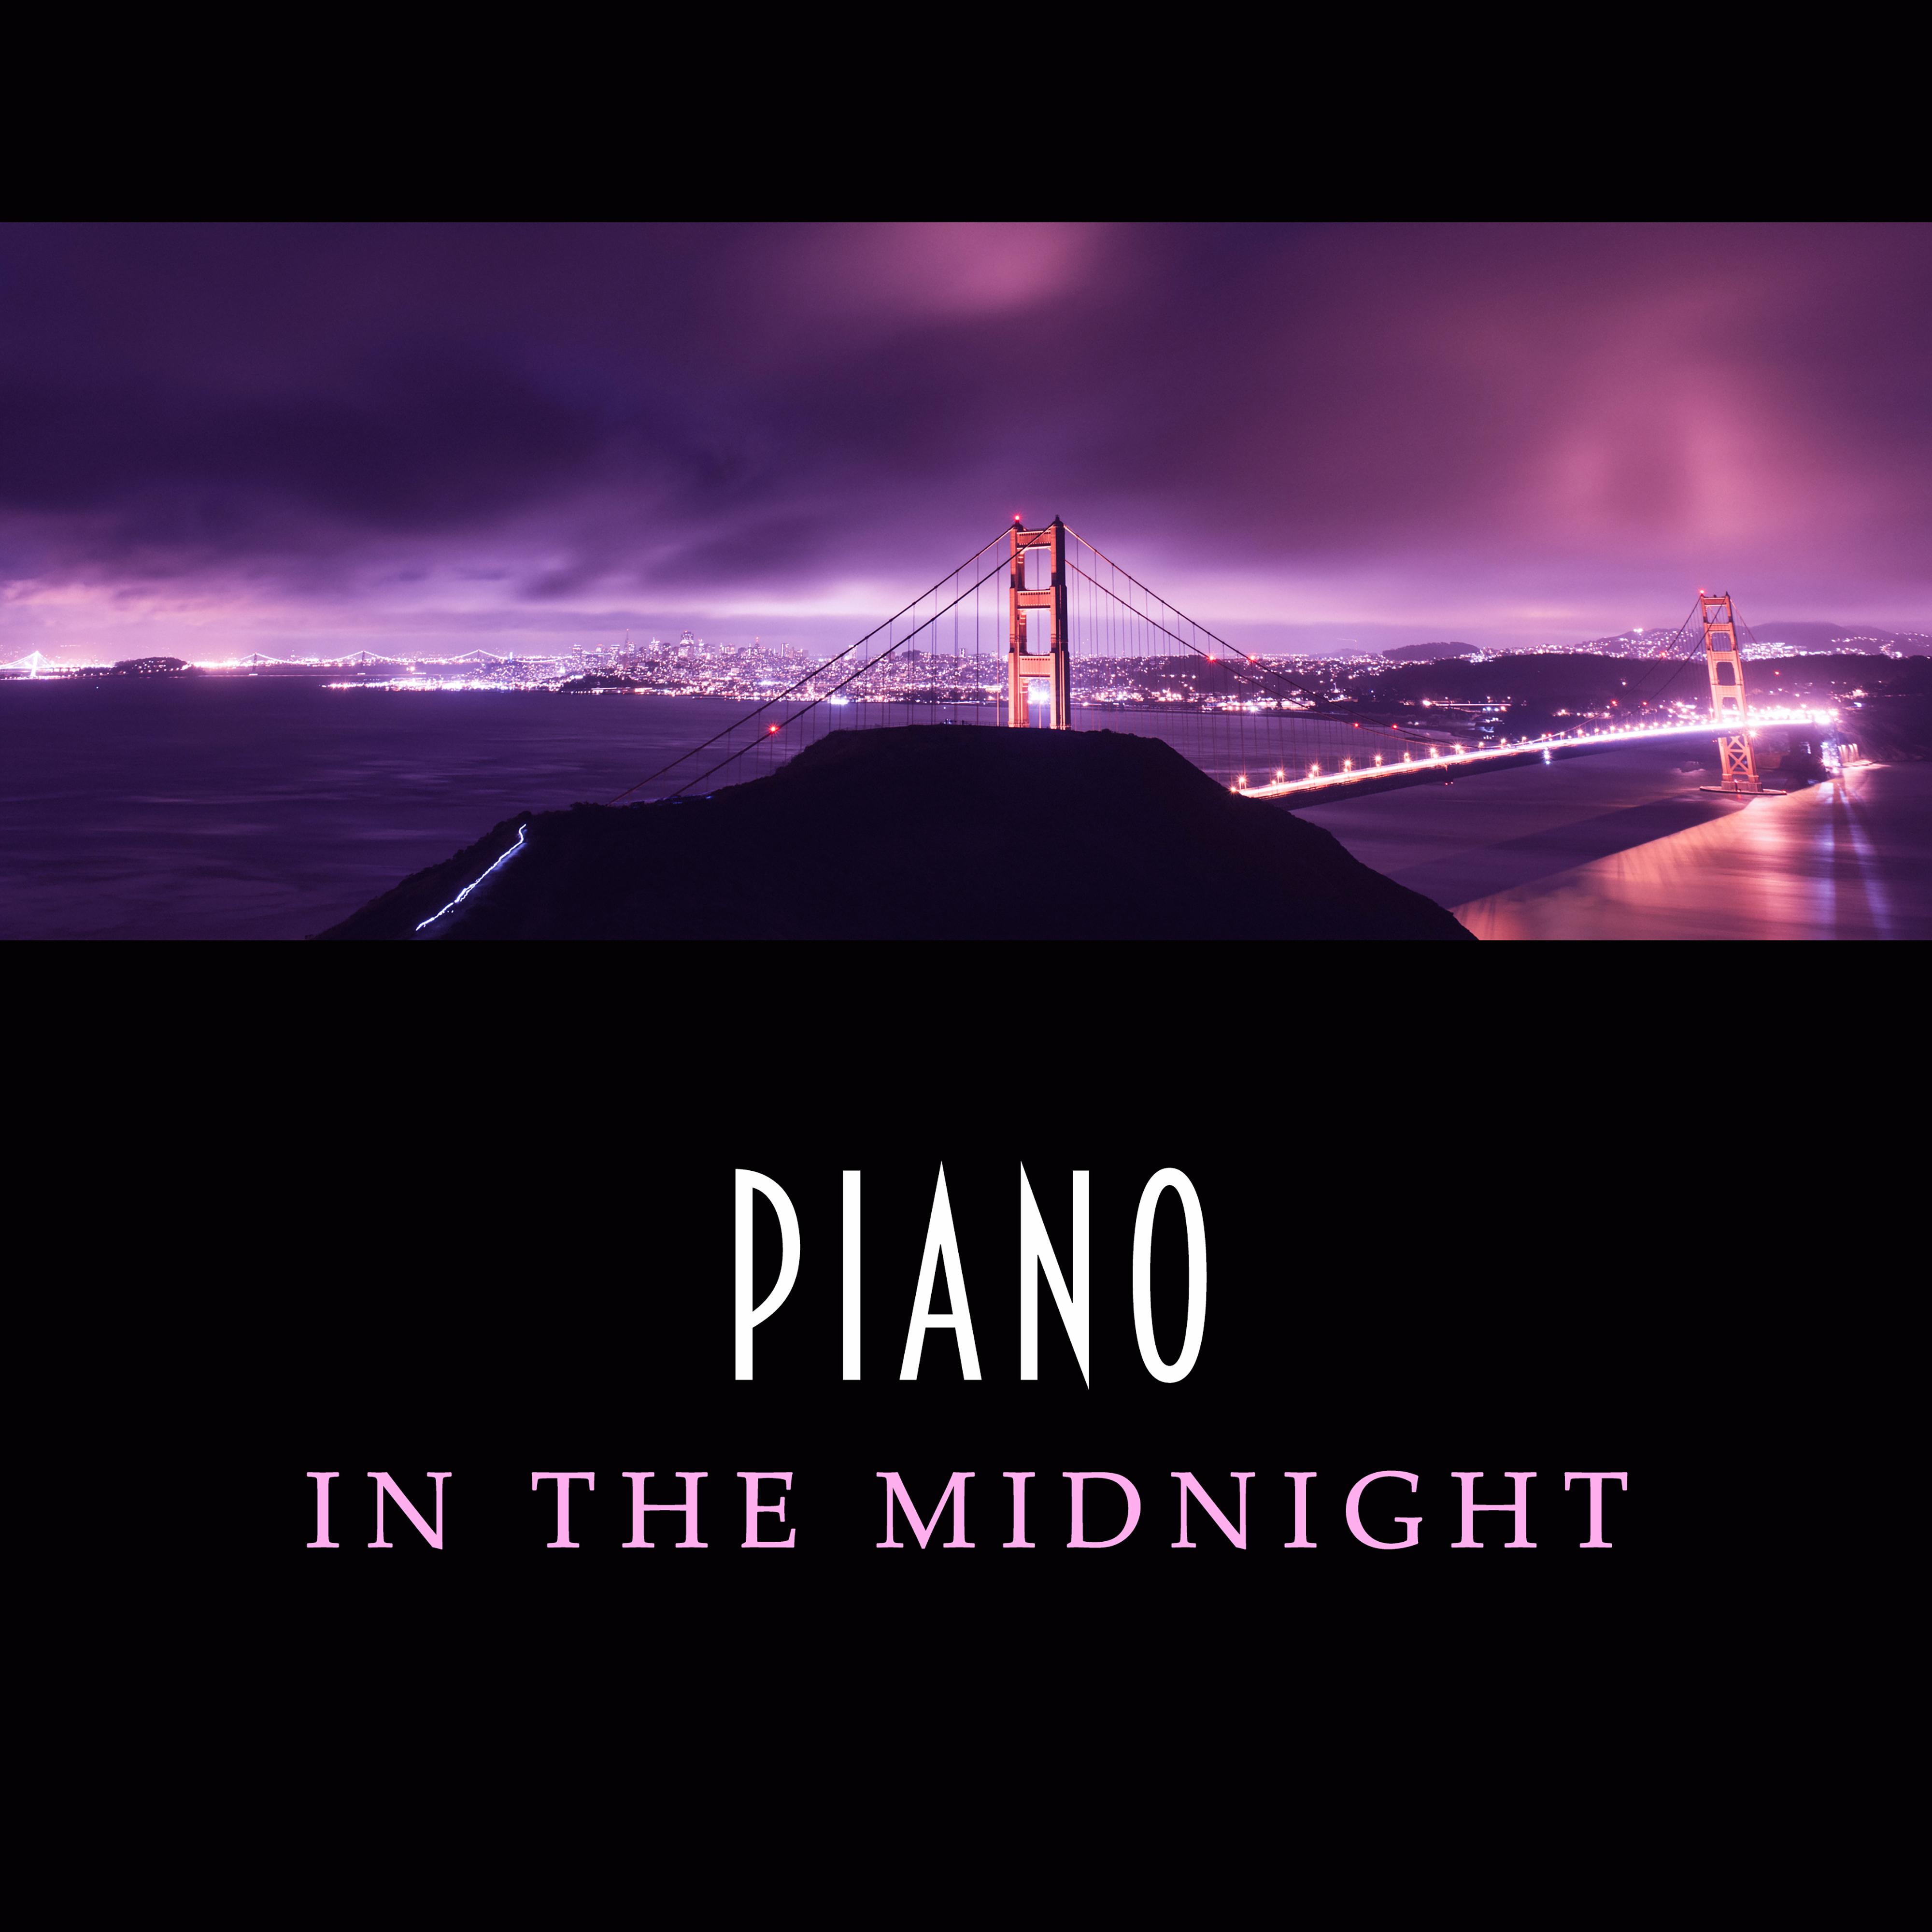 Piano in the Midnight – Instrumental Jazz, Mellow Sounds of Calming Piano, Jazz Lounge, Wine Bar